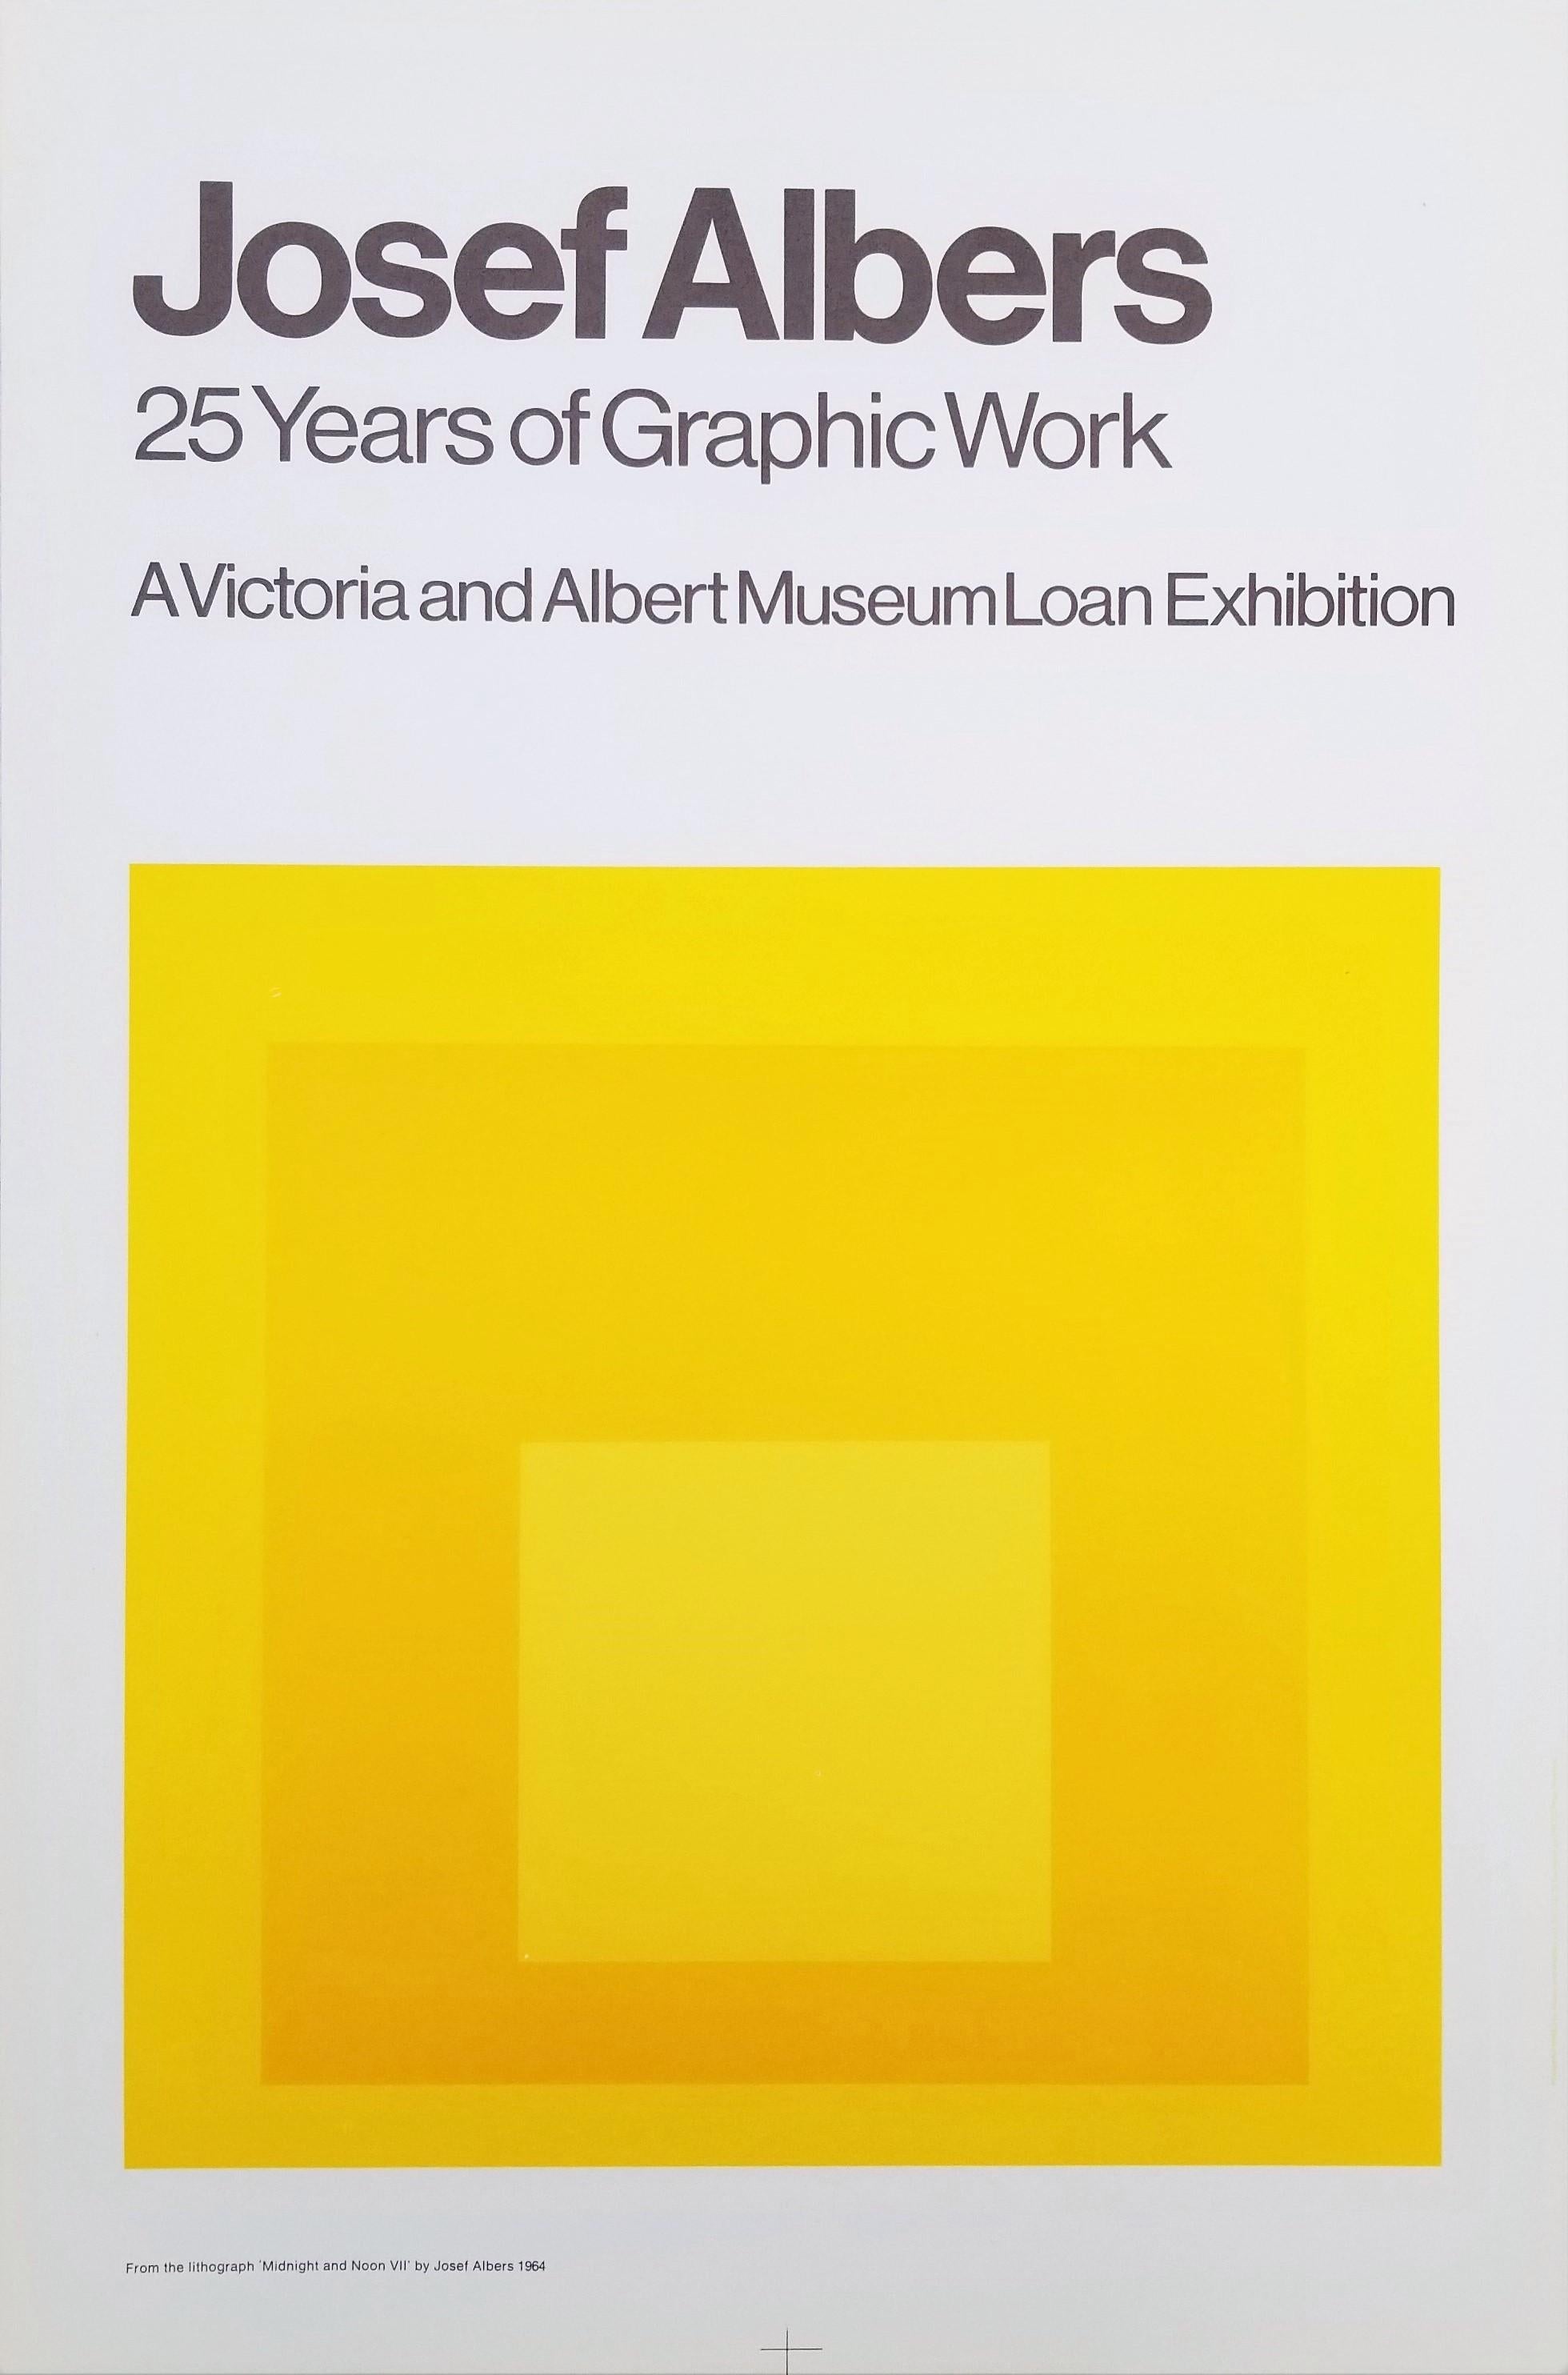 Artist: (after) Josef Albers (German-American, 1888-1976)
Title: "Josef Albers: 25 Years of Graphic Work (Midnight and Noon VII)"
Year: 1968
Medium: Original Lithograph, Exhibition Poster on light smooth wove paper
Limited edition: Unknown
Printer: